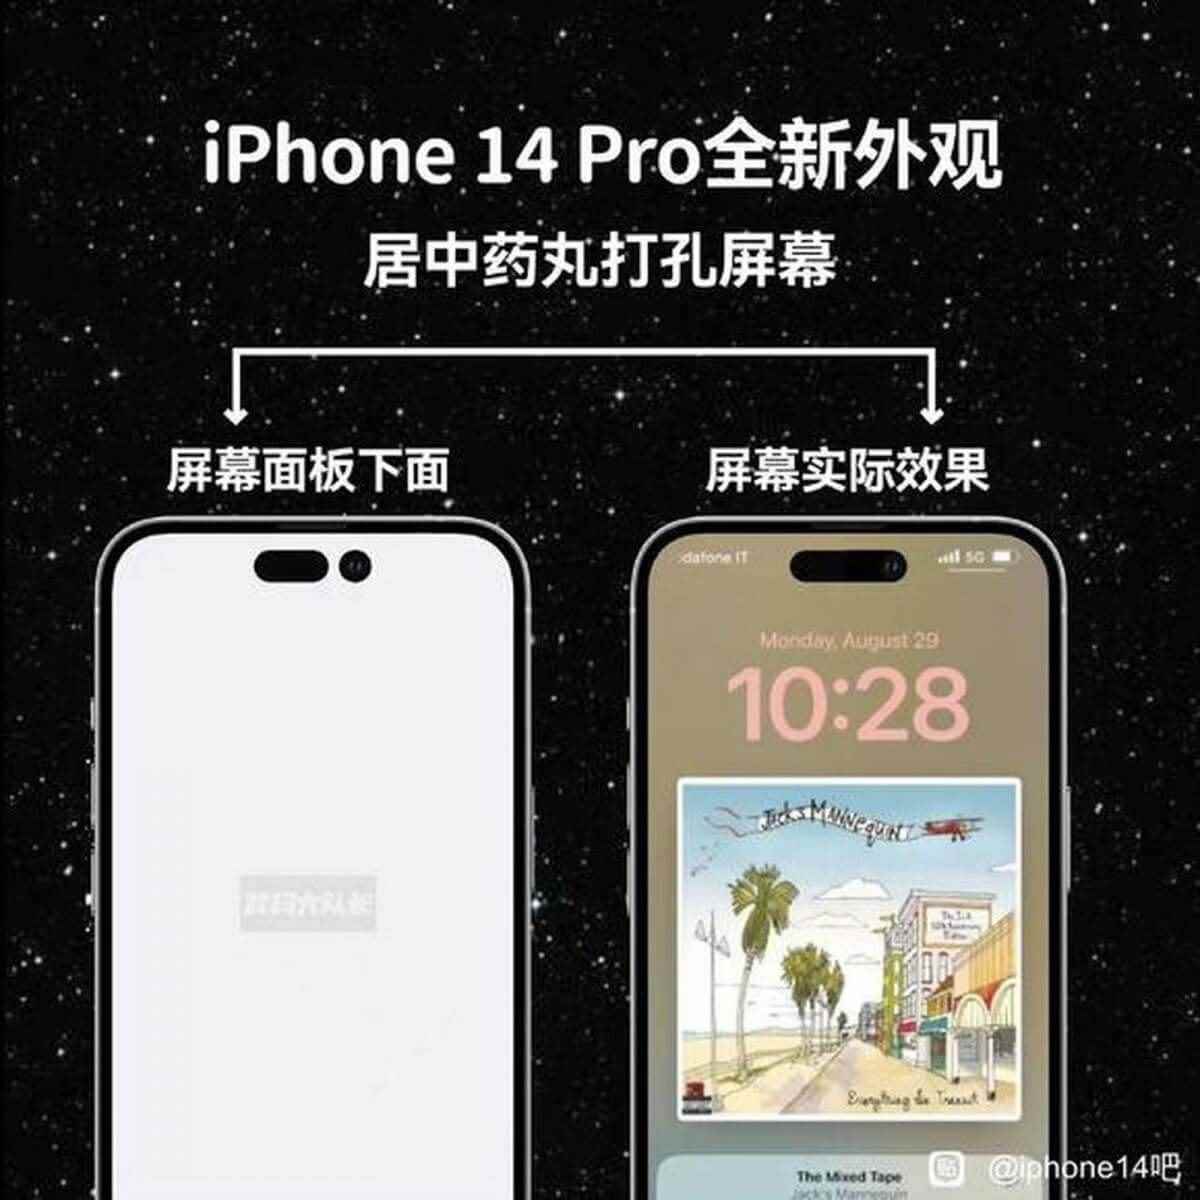 1662026519 628 Rumors claim that the iPhone 14 Pros dual cutouts will